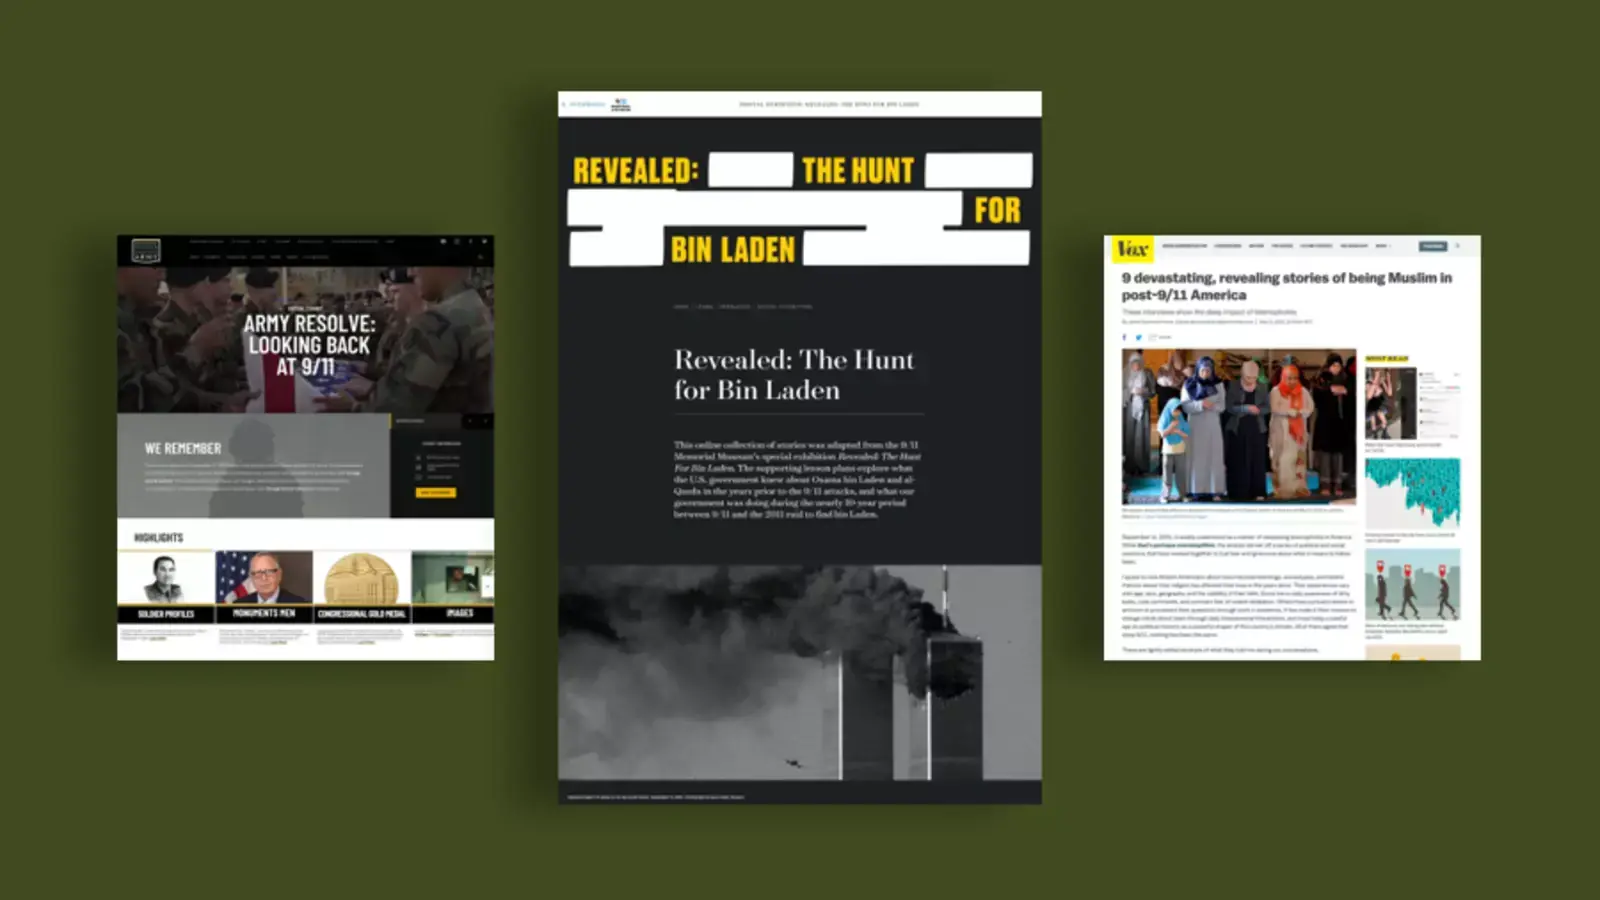 9/11 Online Exhibits and Resources Worth Viewing